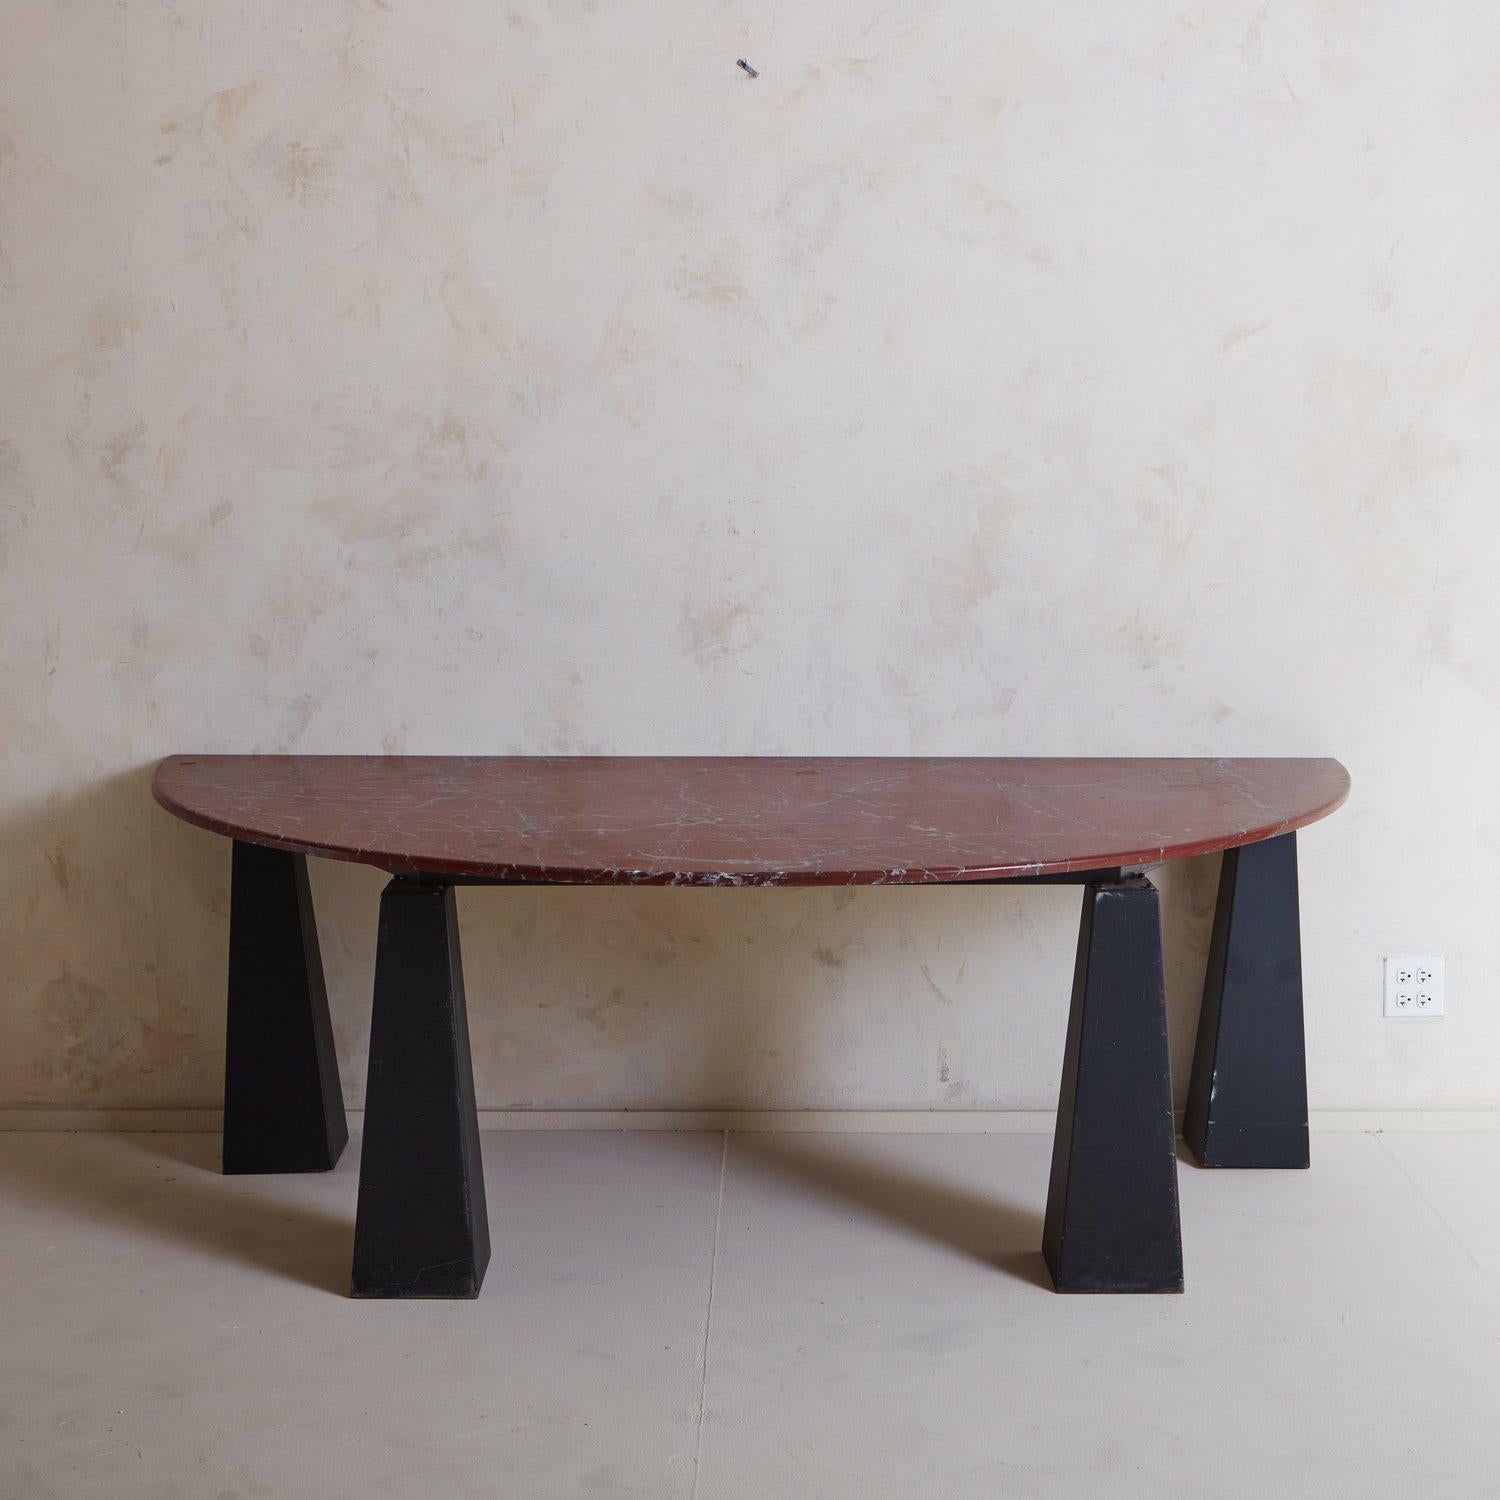 French Red Marble + Iron Base Demilune Console Table, Belgium 1980s For Sale